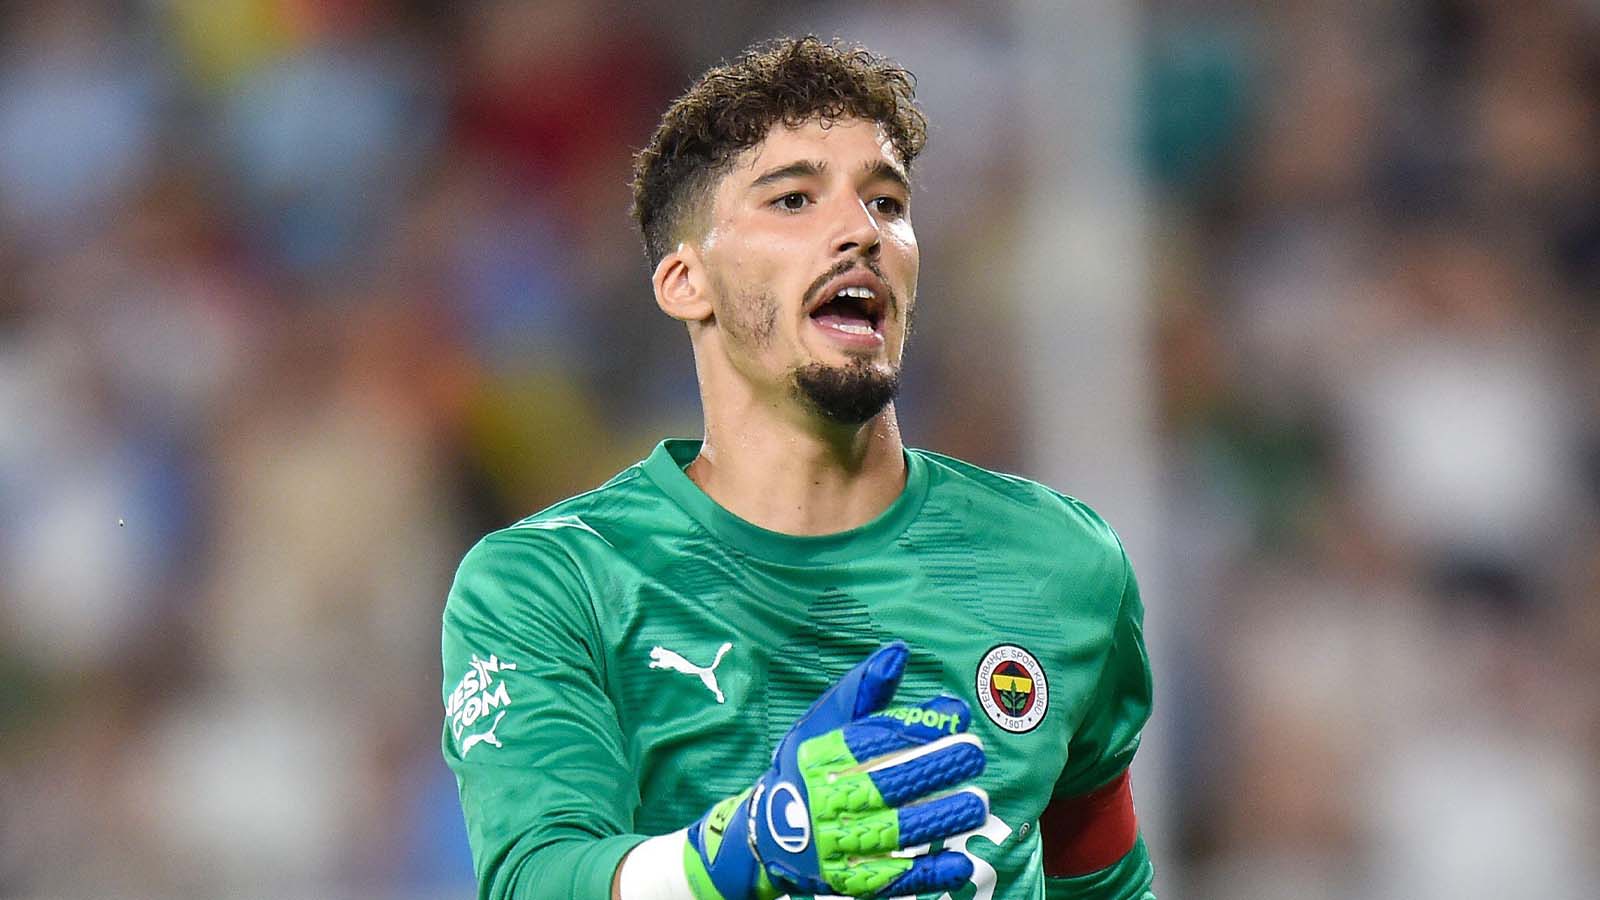 Fenerbahce goalkeeper Altay Bayindir is set for a second medical with Manchester United ahead of his summer transfer, according to Haber Turk. - Bóng Đá